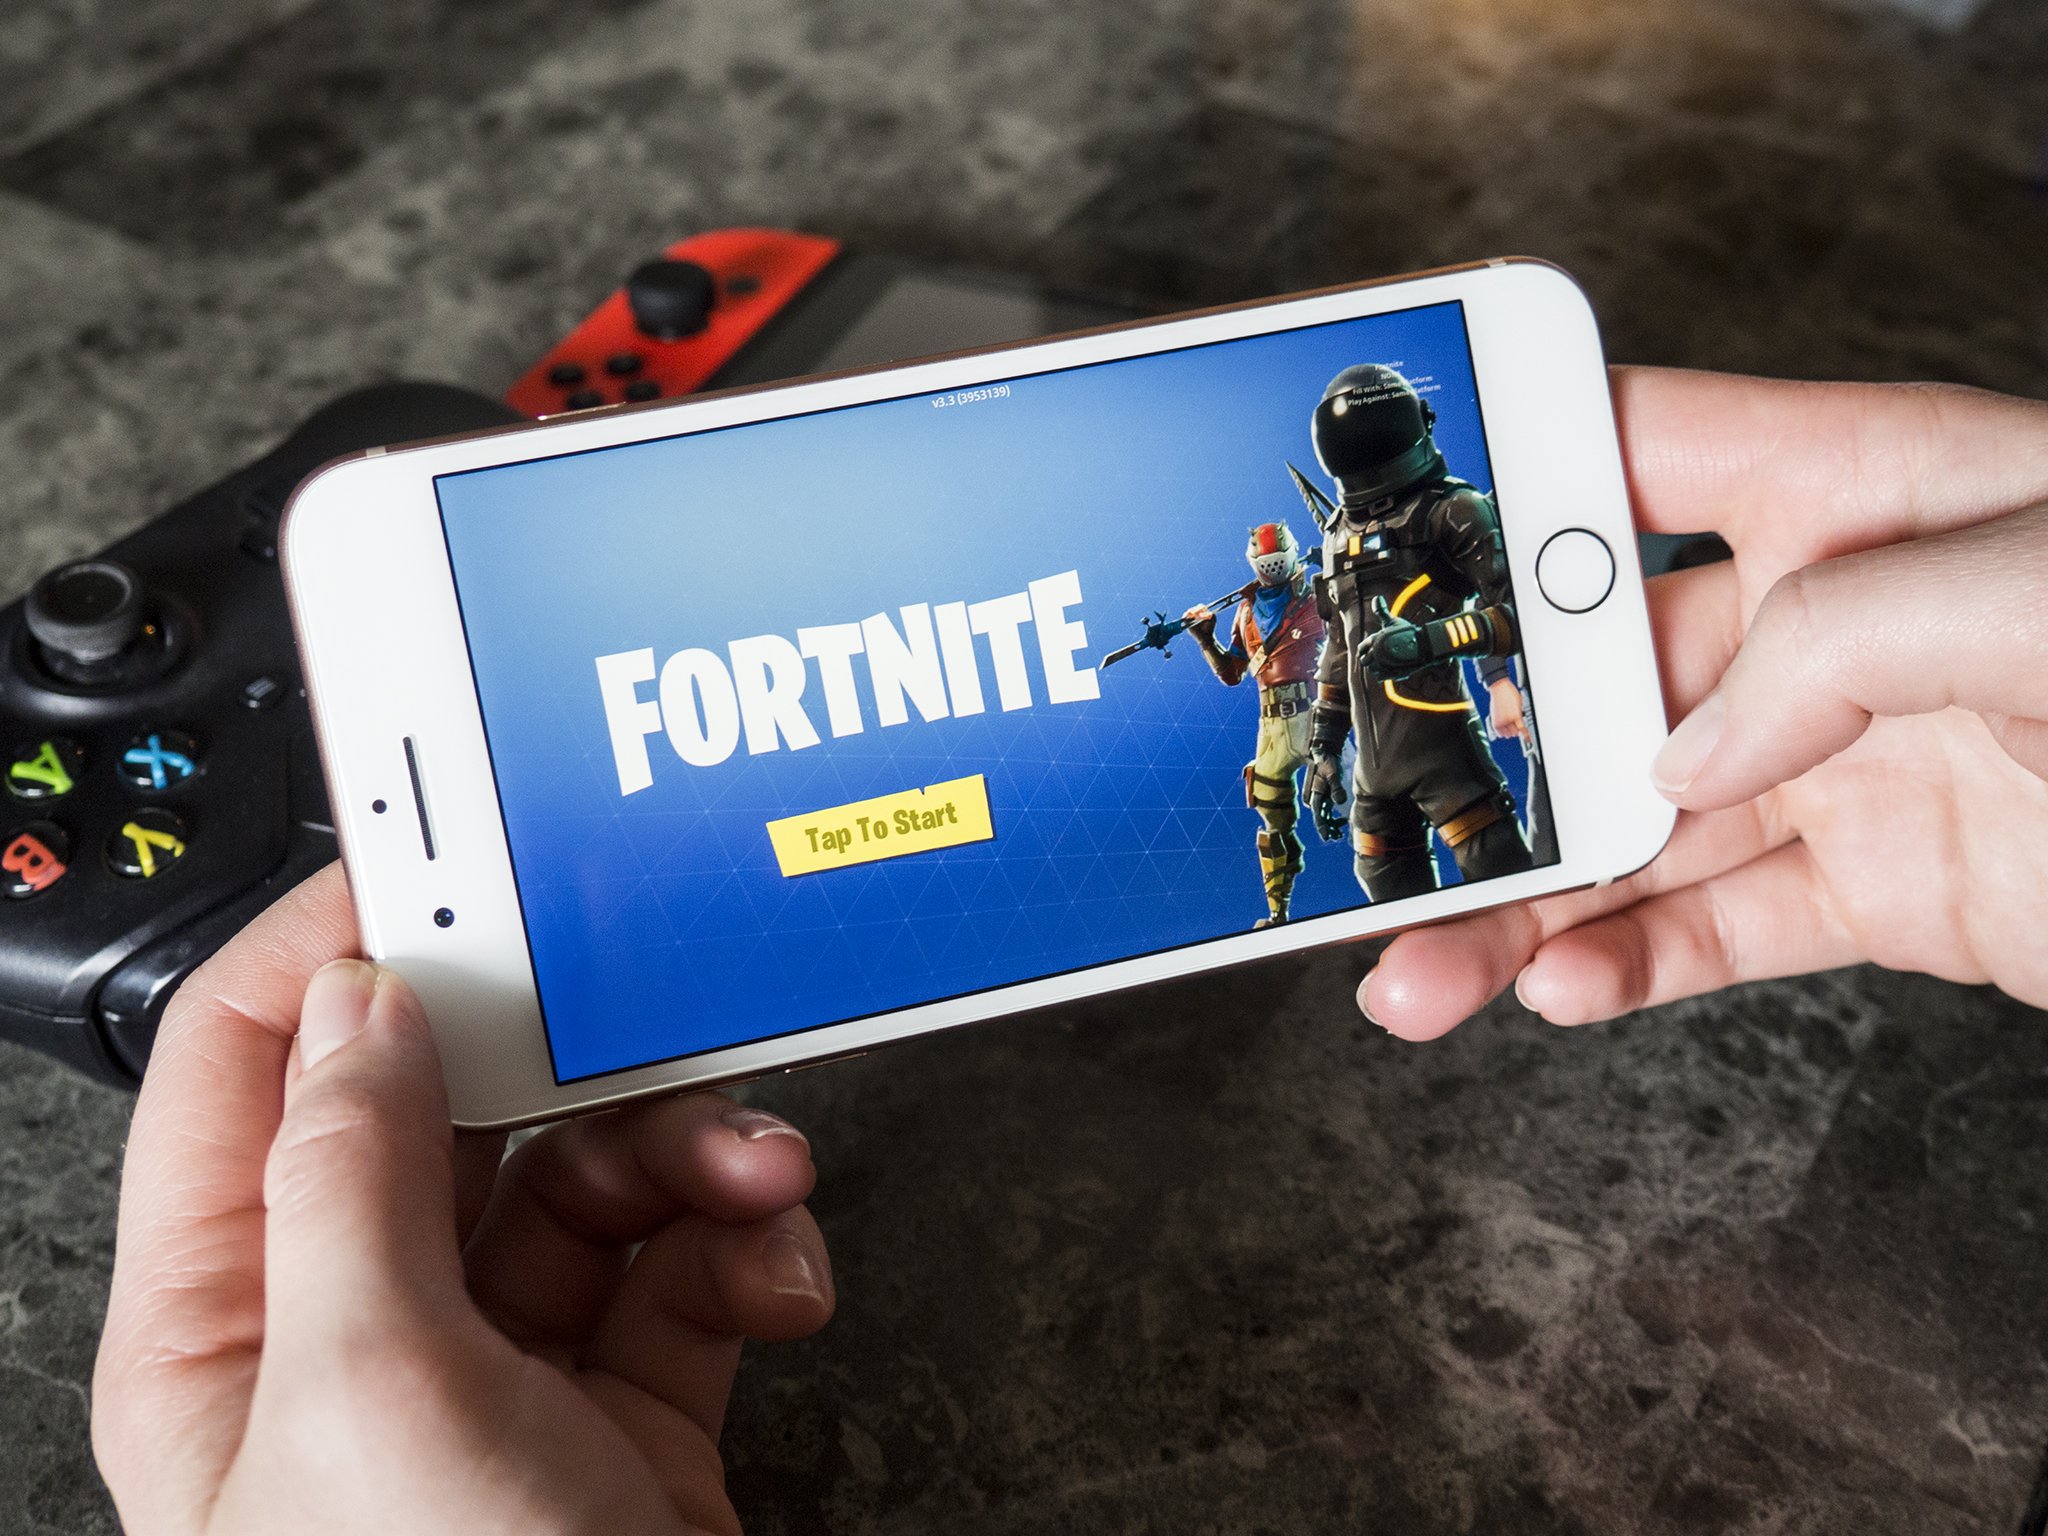 Play Fortnite For Free With Xbox Cloud Gaming - Geek News Central